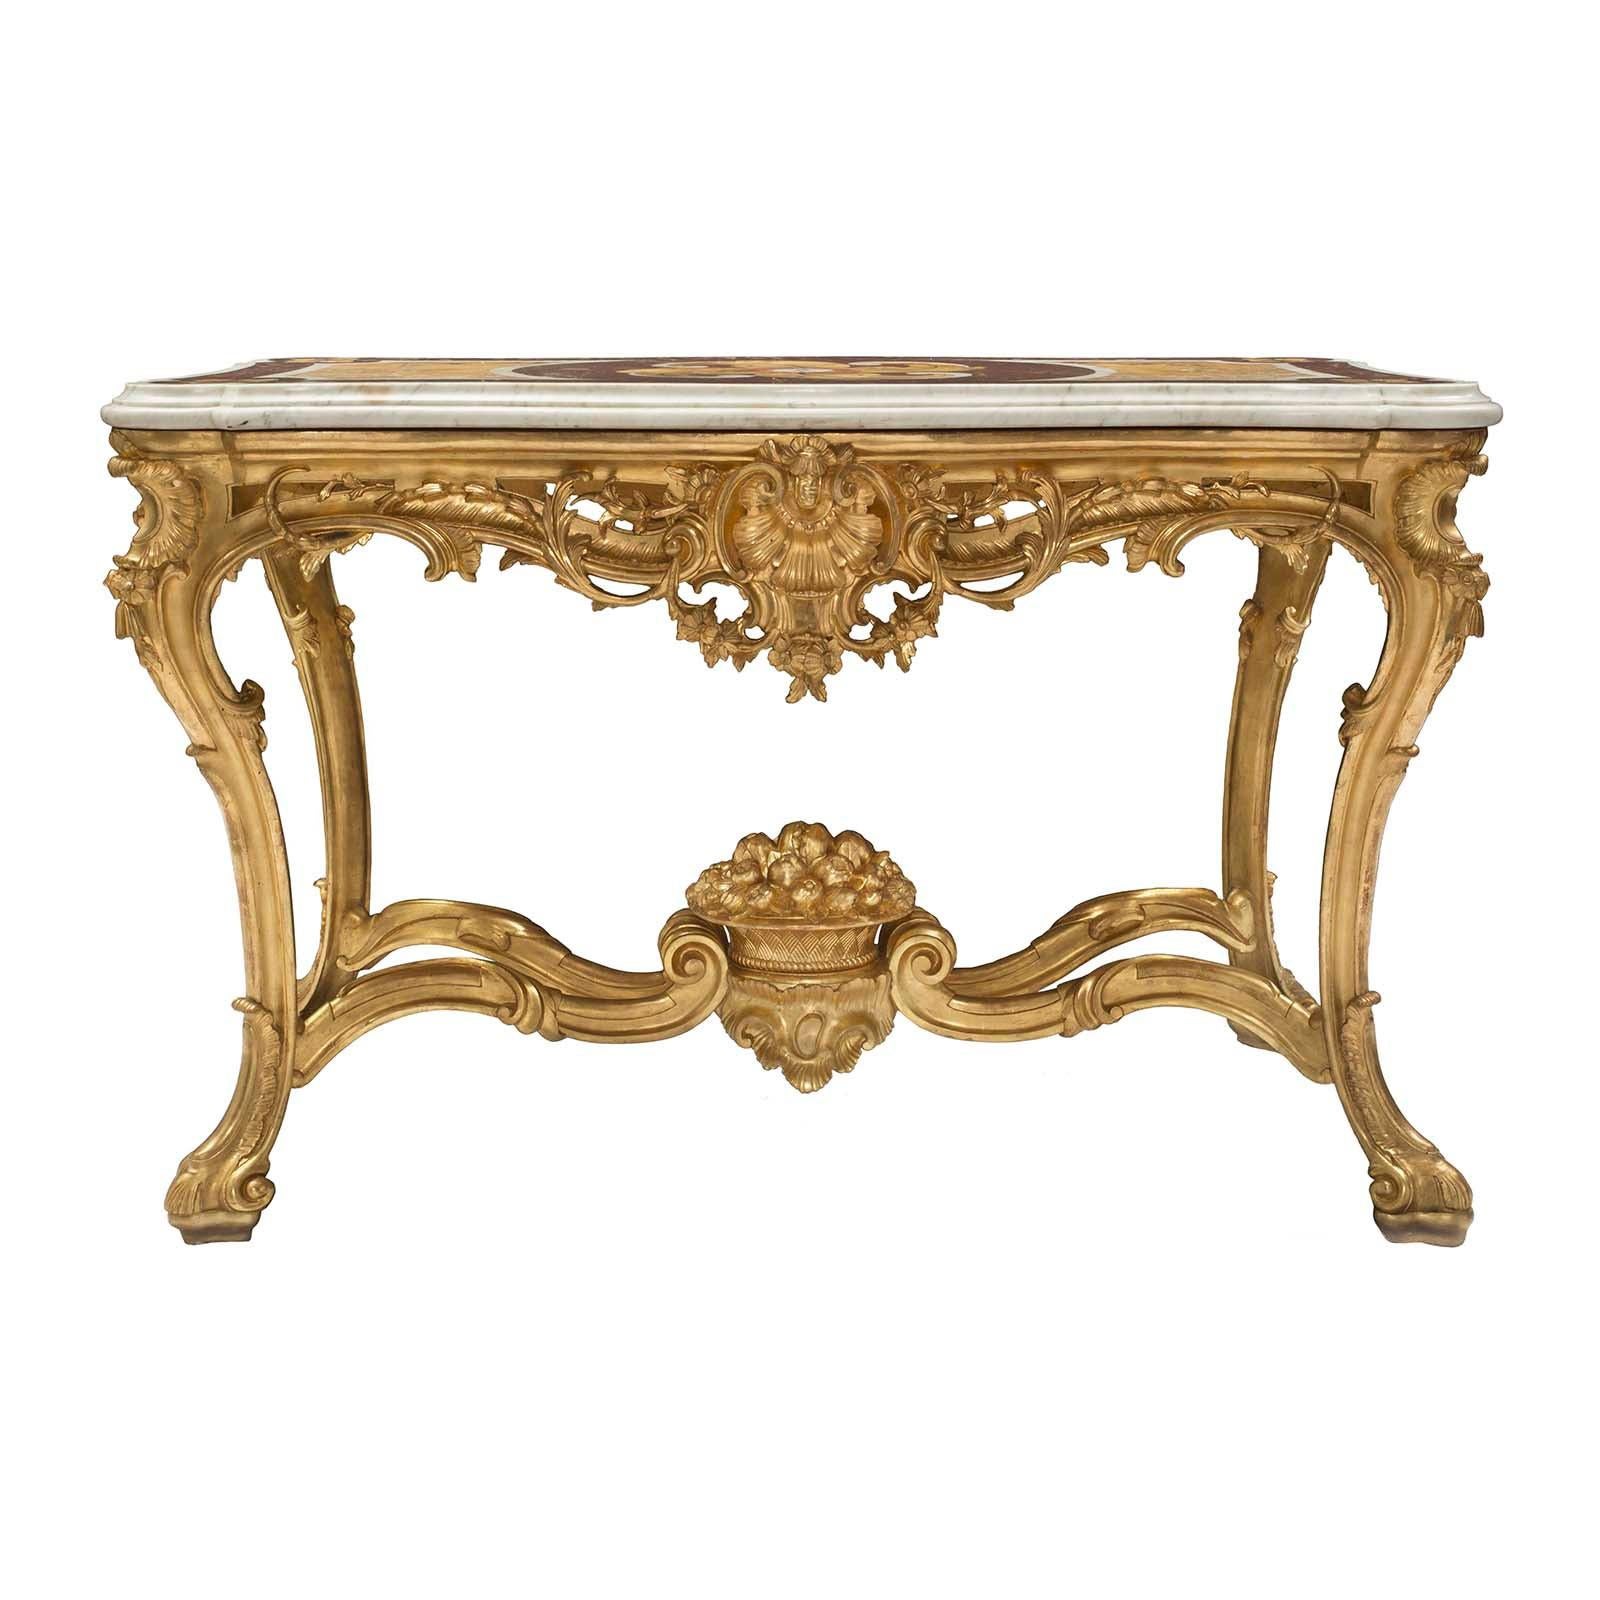 Italian Early 19th Century Louis XV Style Giltwood and Marble Center Table For Sale